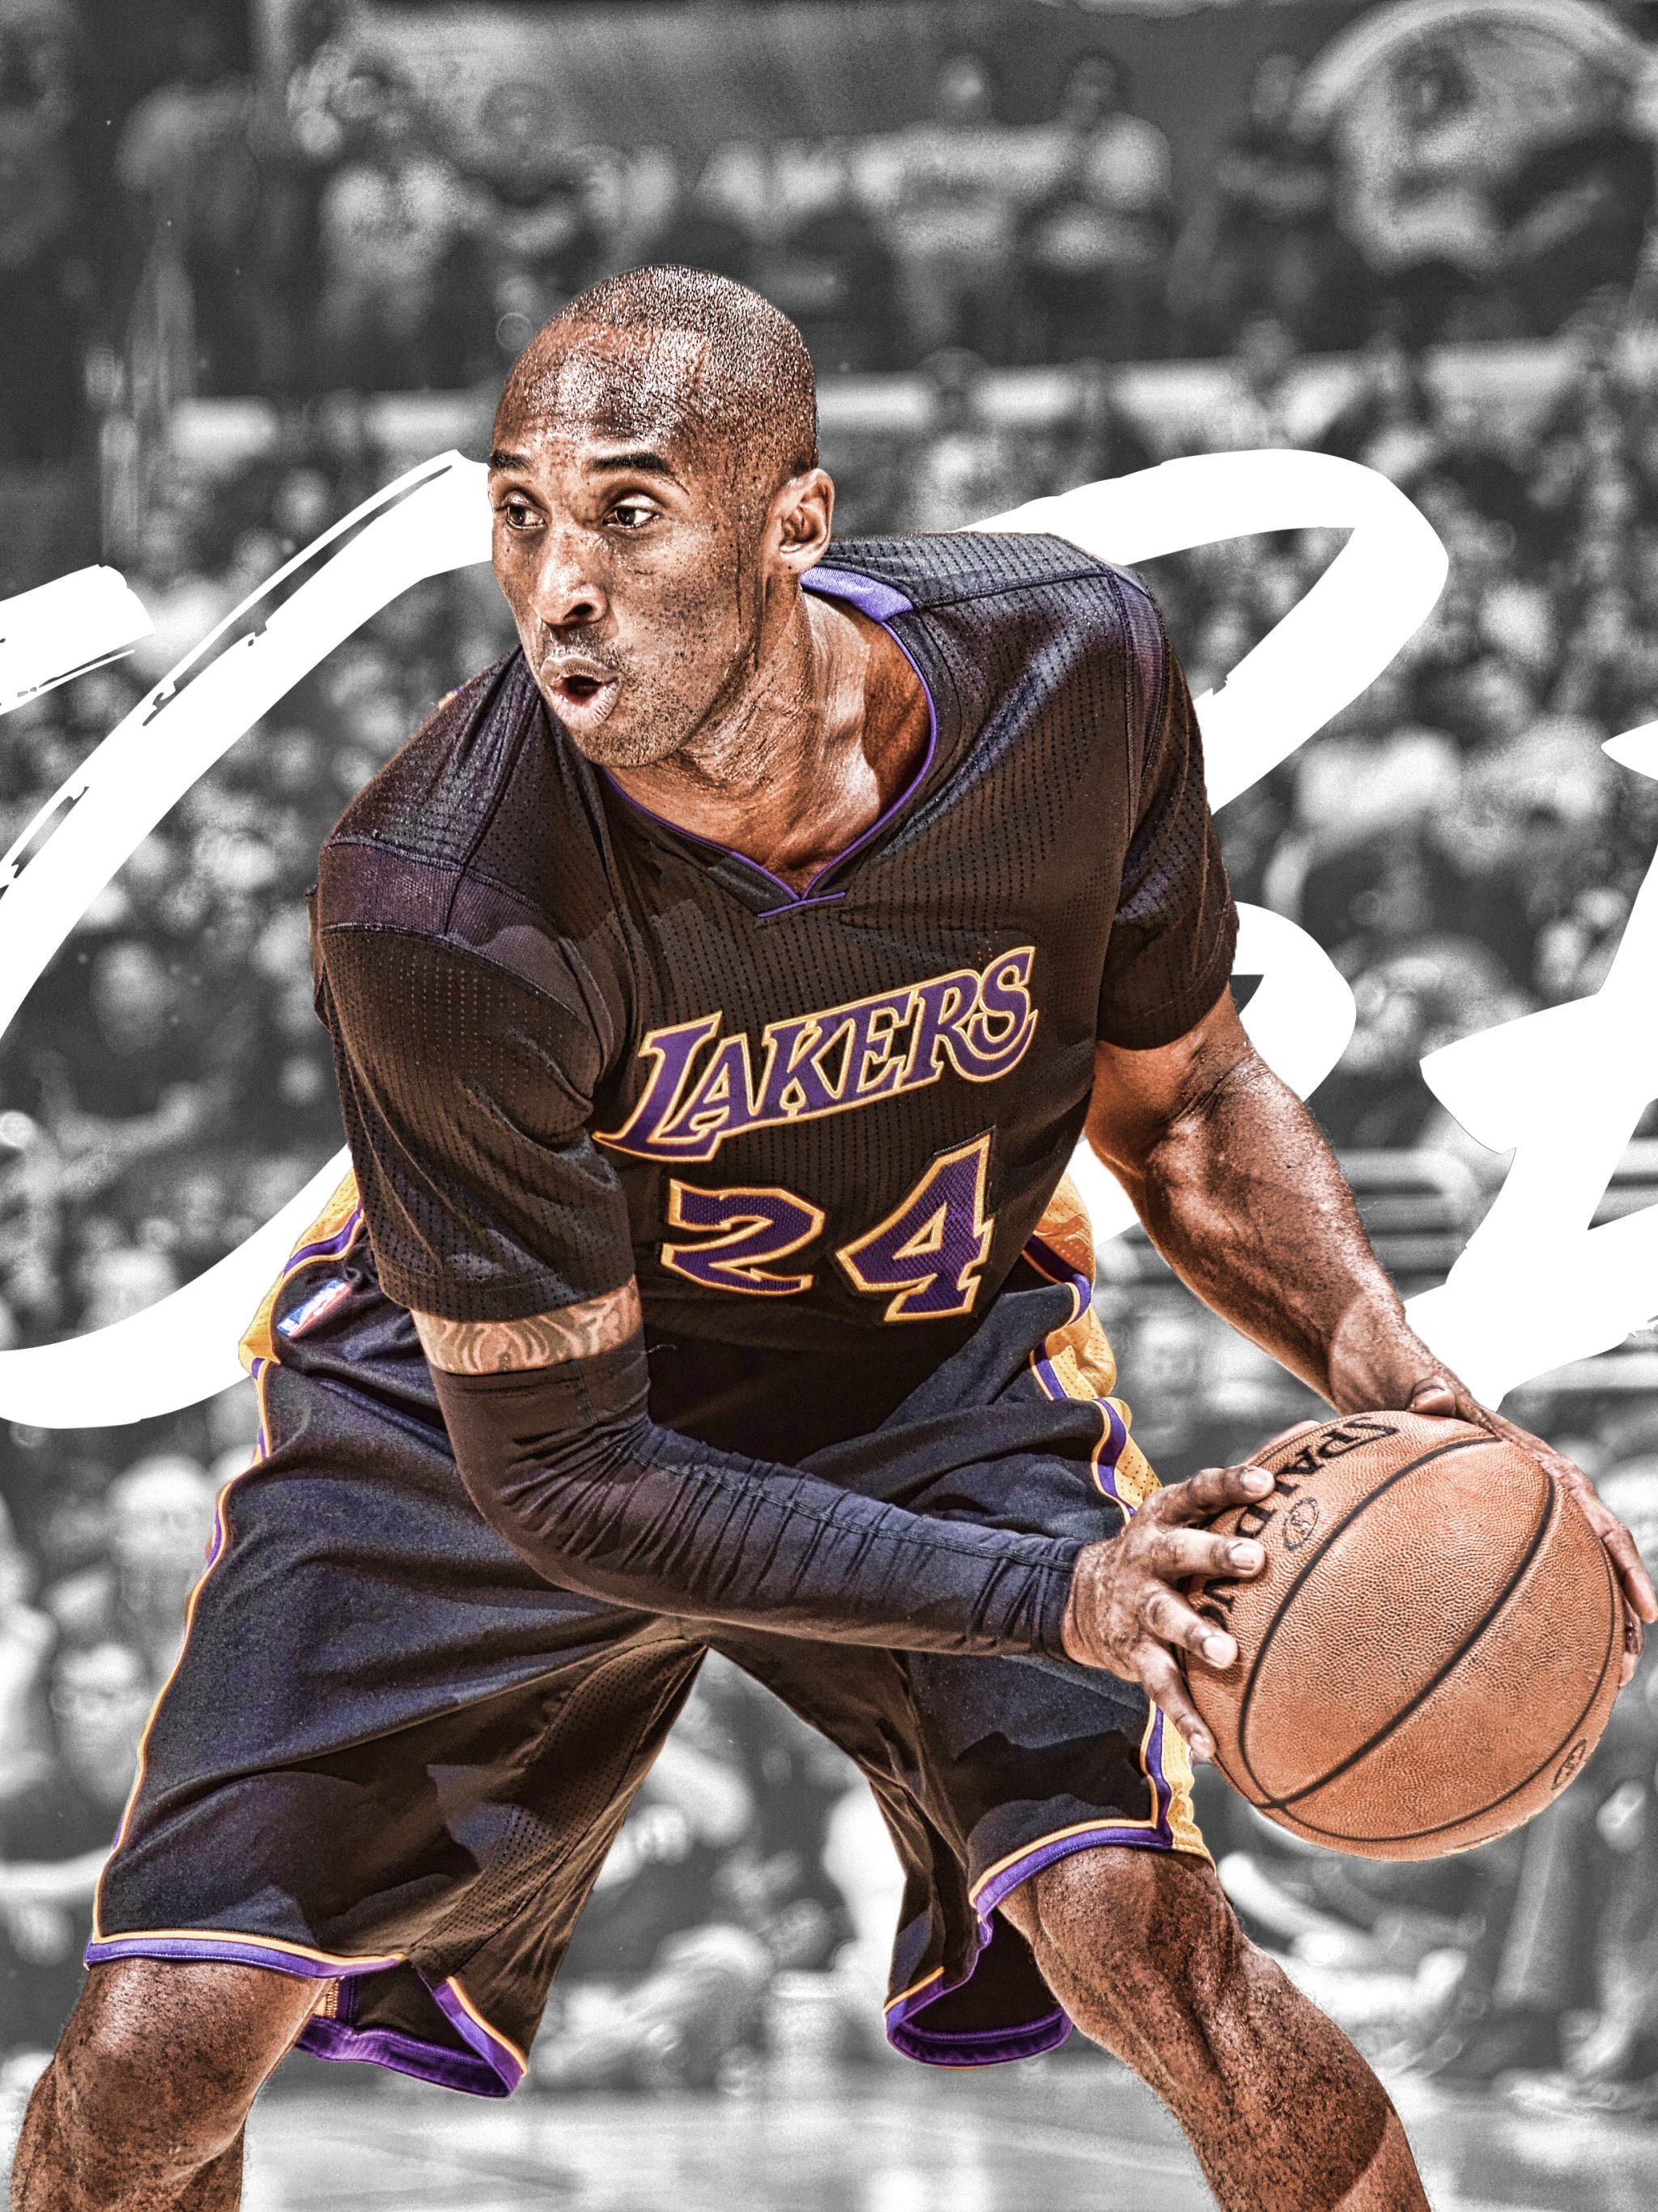 Mobile wallpaper: Sports, Basketball, Nba, Kobe Bryant, Los Angeles Lakers, 1181773 download the picture for free